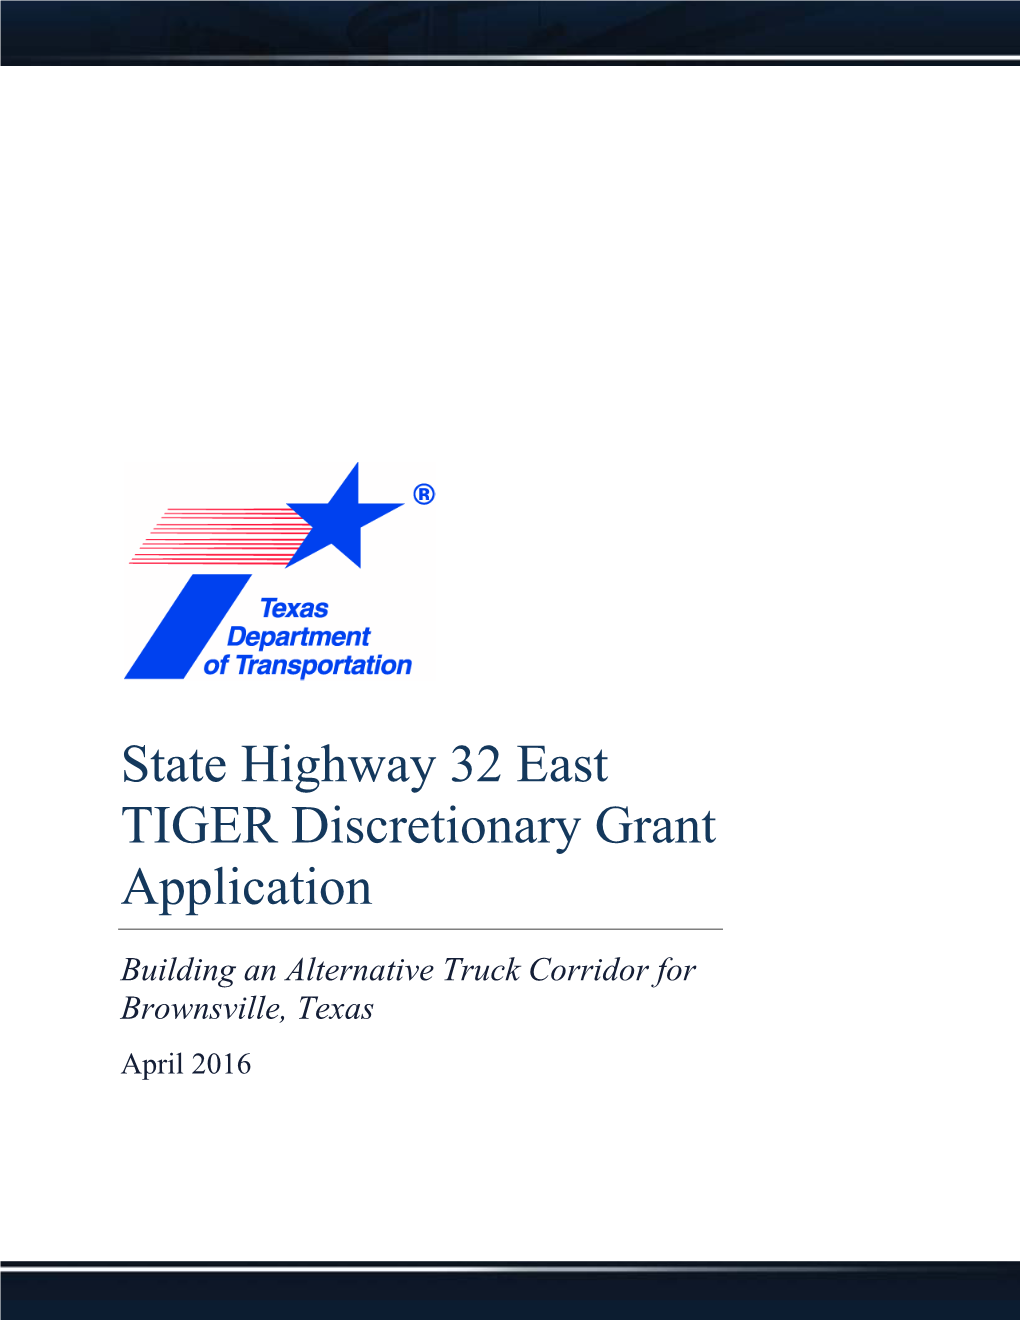 State Highway 32 East TIGER Discretionary Grant Application